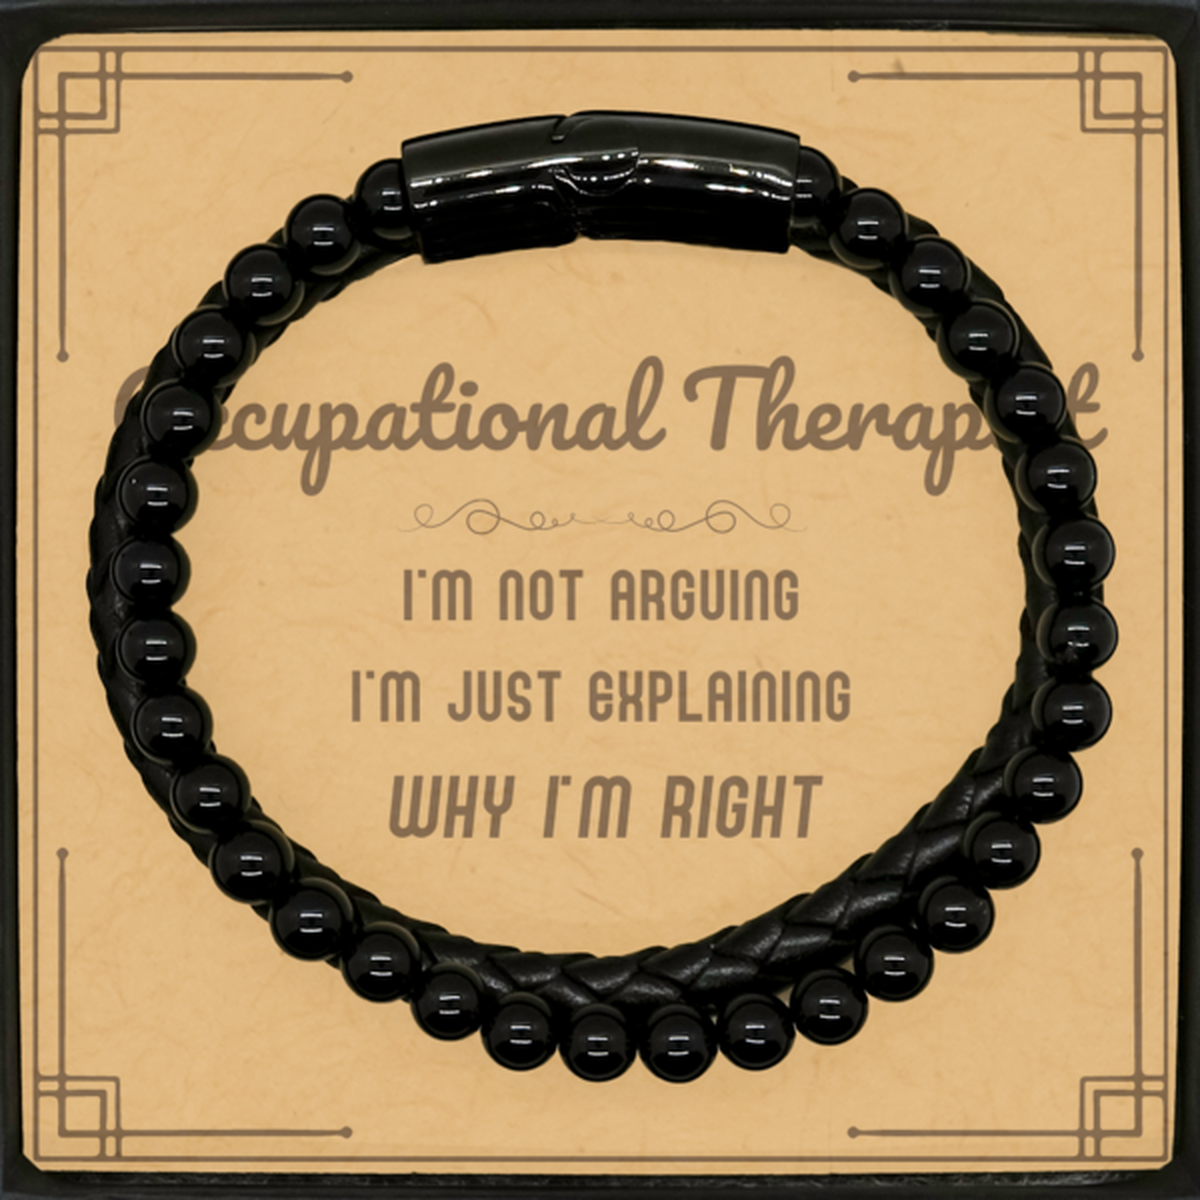 Occupational Therapist I'm not Arguing. I'm Just Explaining Why I'm RIGHT Stone Leather Bracelets, Funny Saying Quote Occupational Therapist Gifts For Occupational Therapist Message Card Graduation Birthday Christmas Gifts for Men Women Coworker